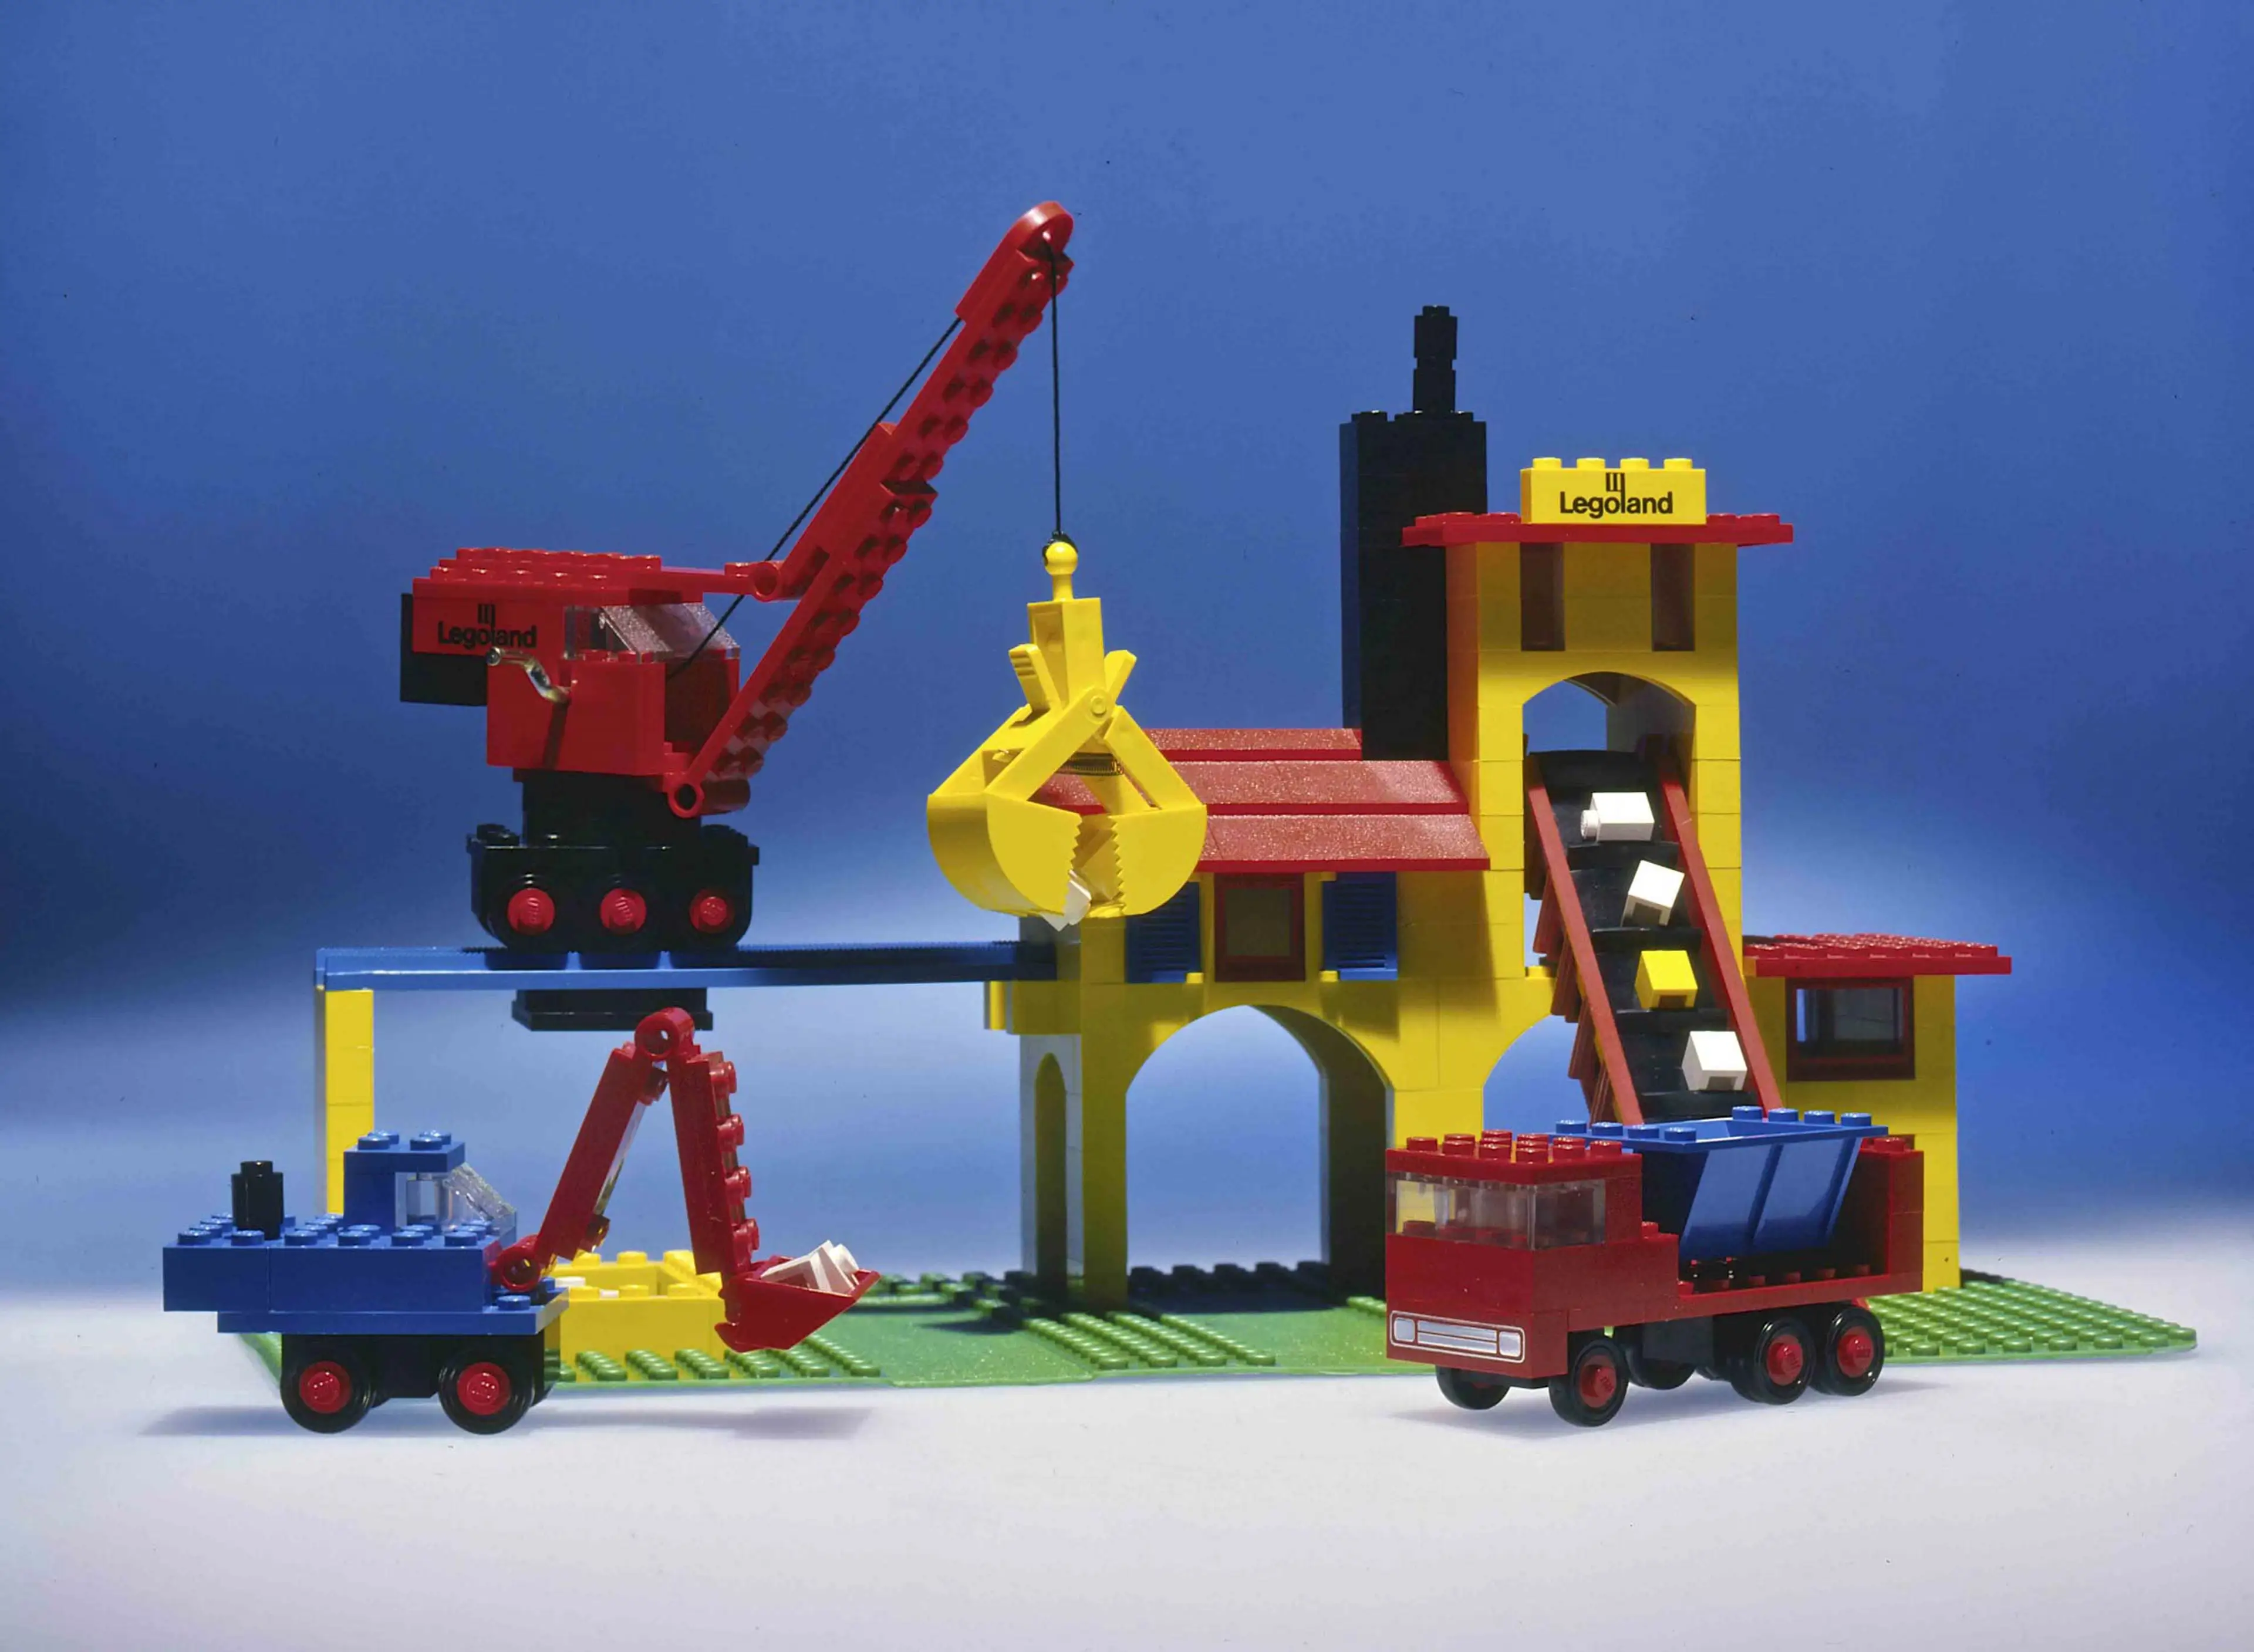 LEGO set from 1974